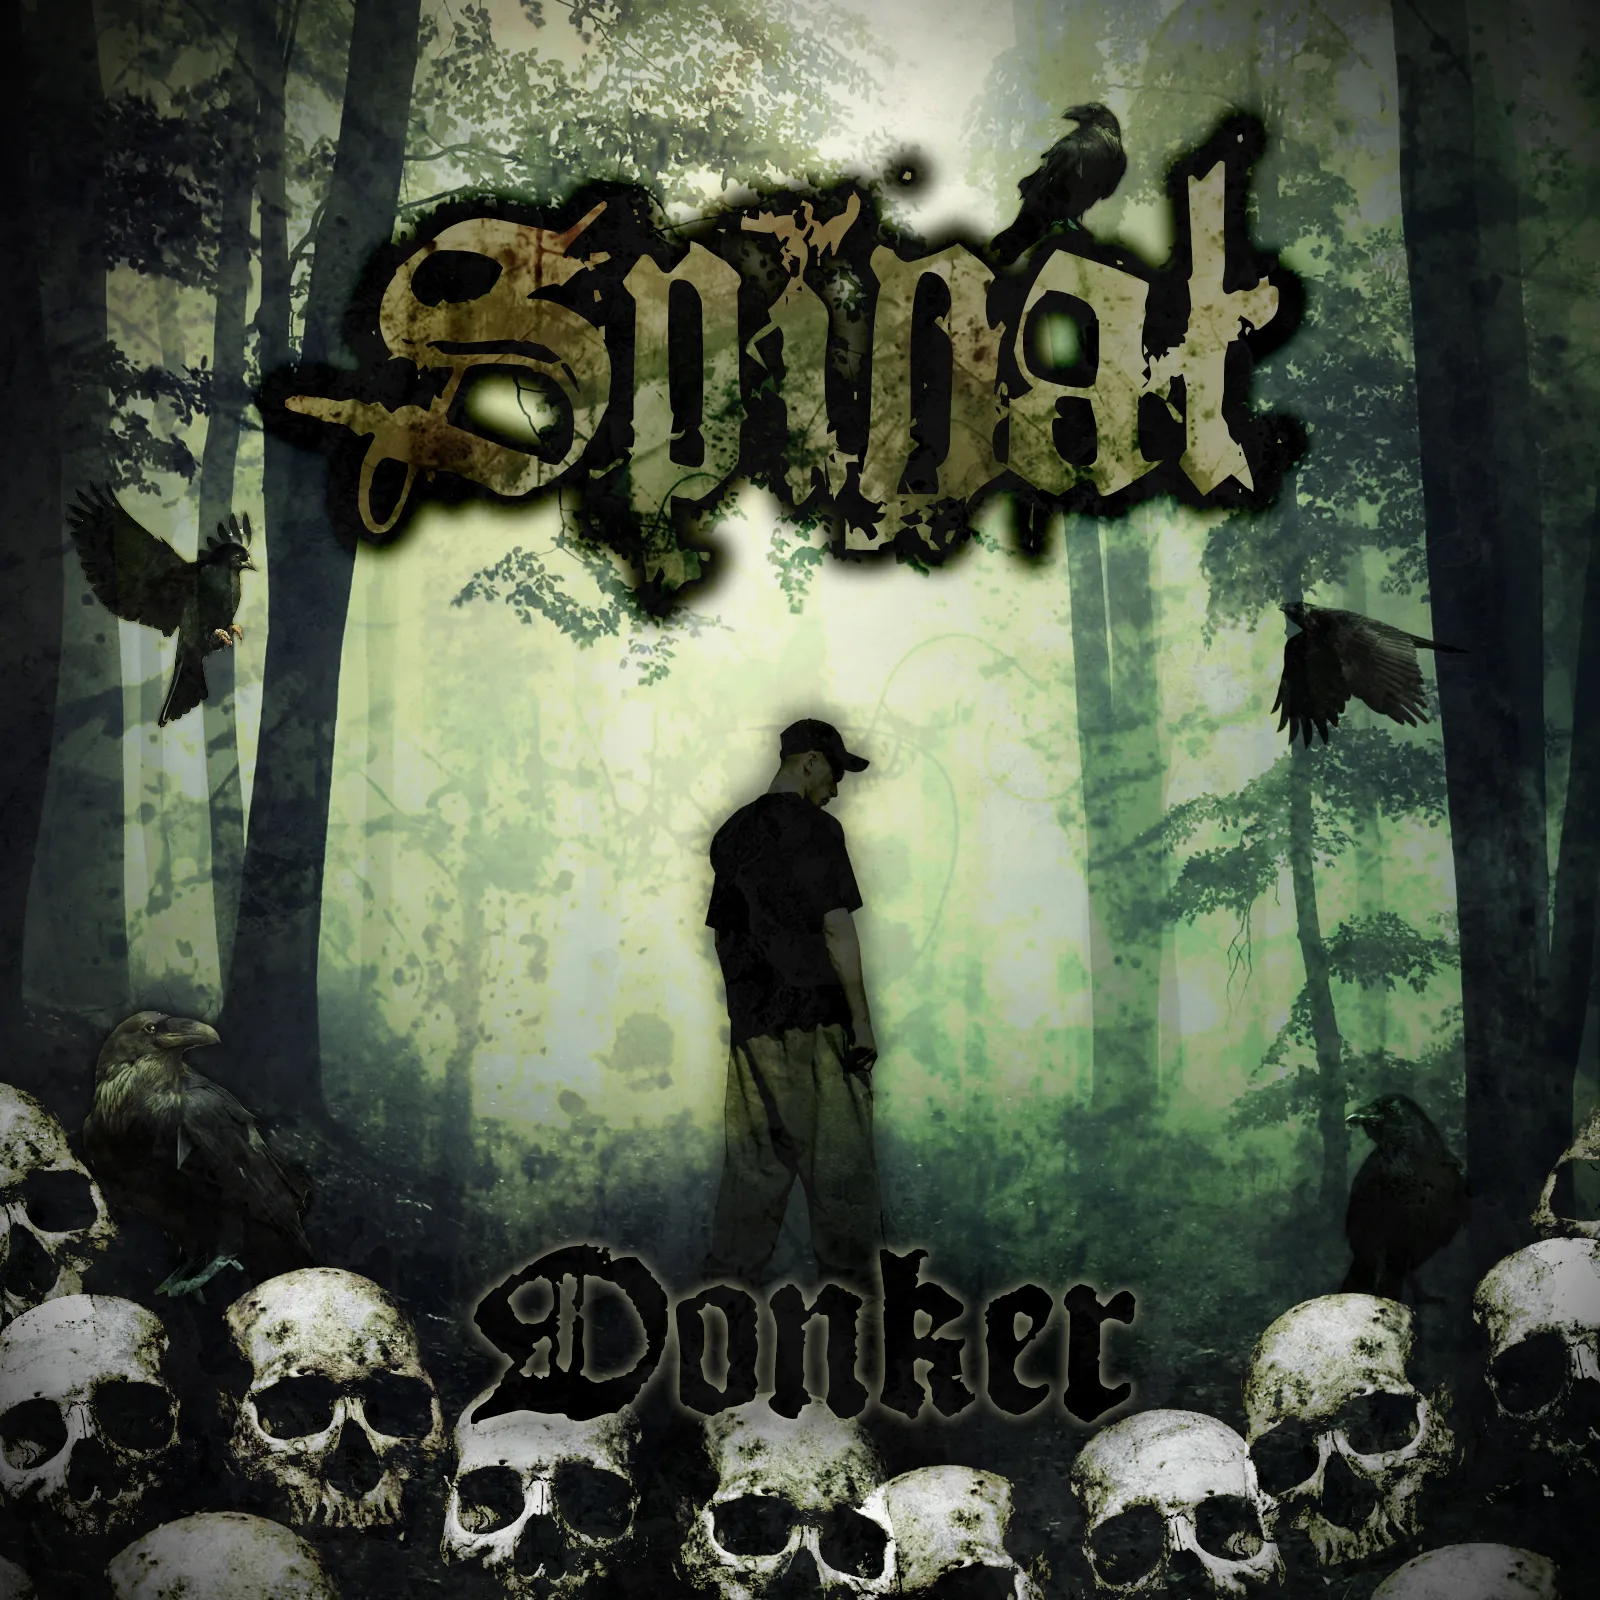 spinal donker42